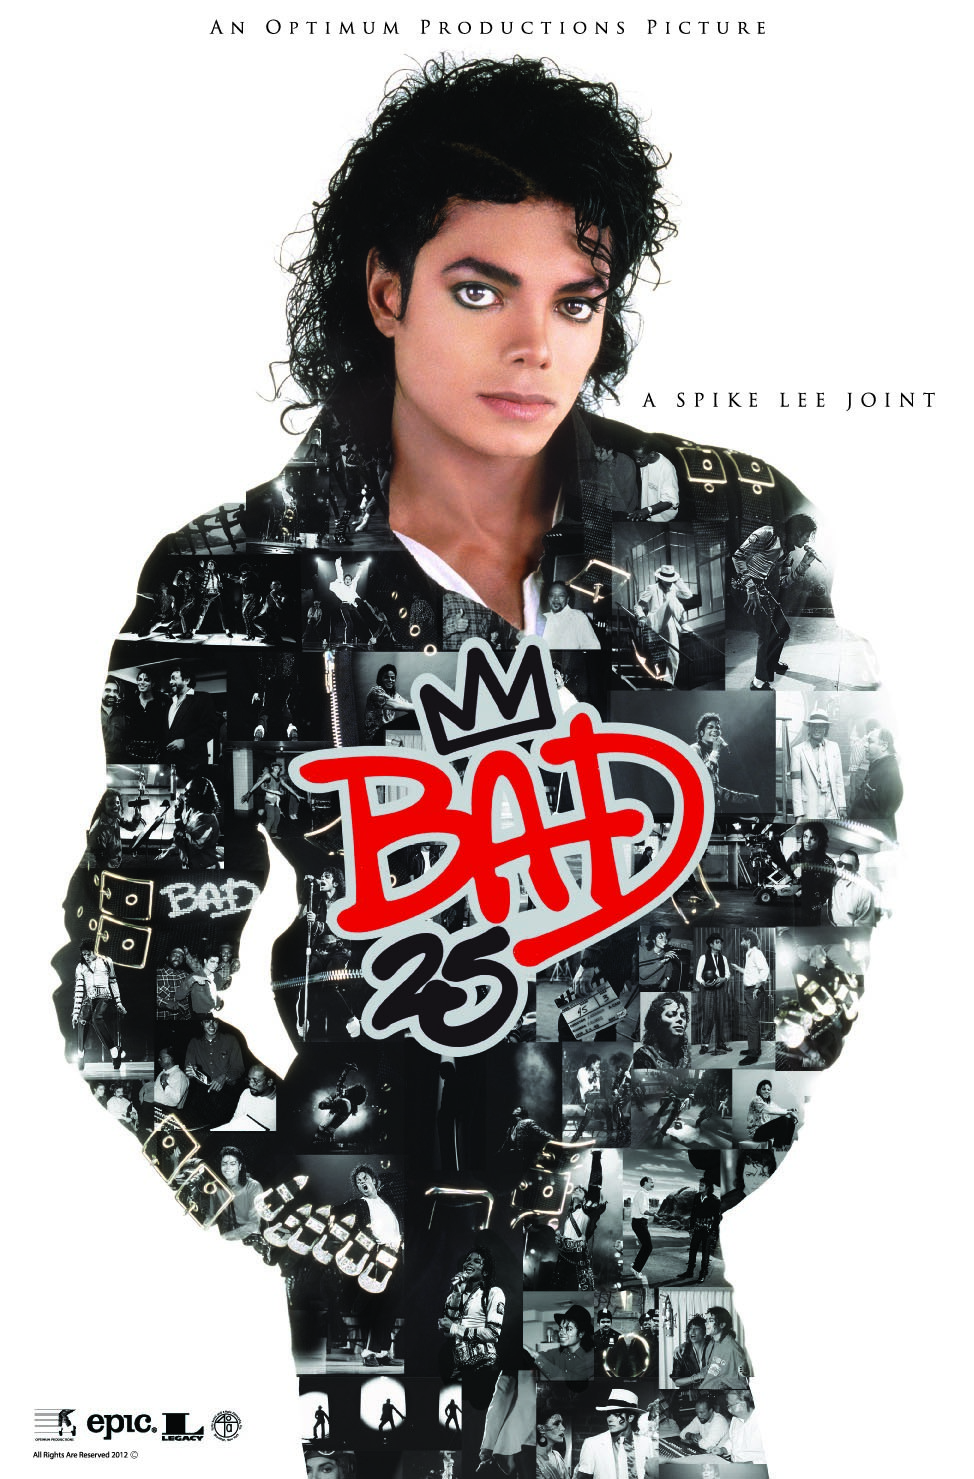 Michael Jackson: Bad 25 Documentary (Directed by Spike Lee)